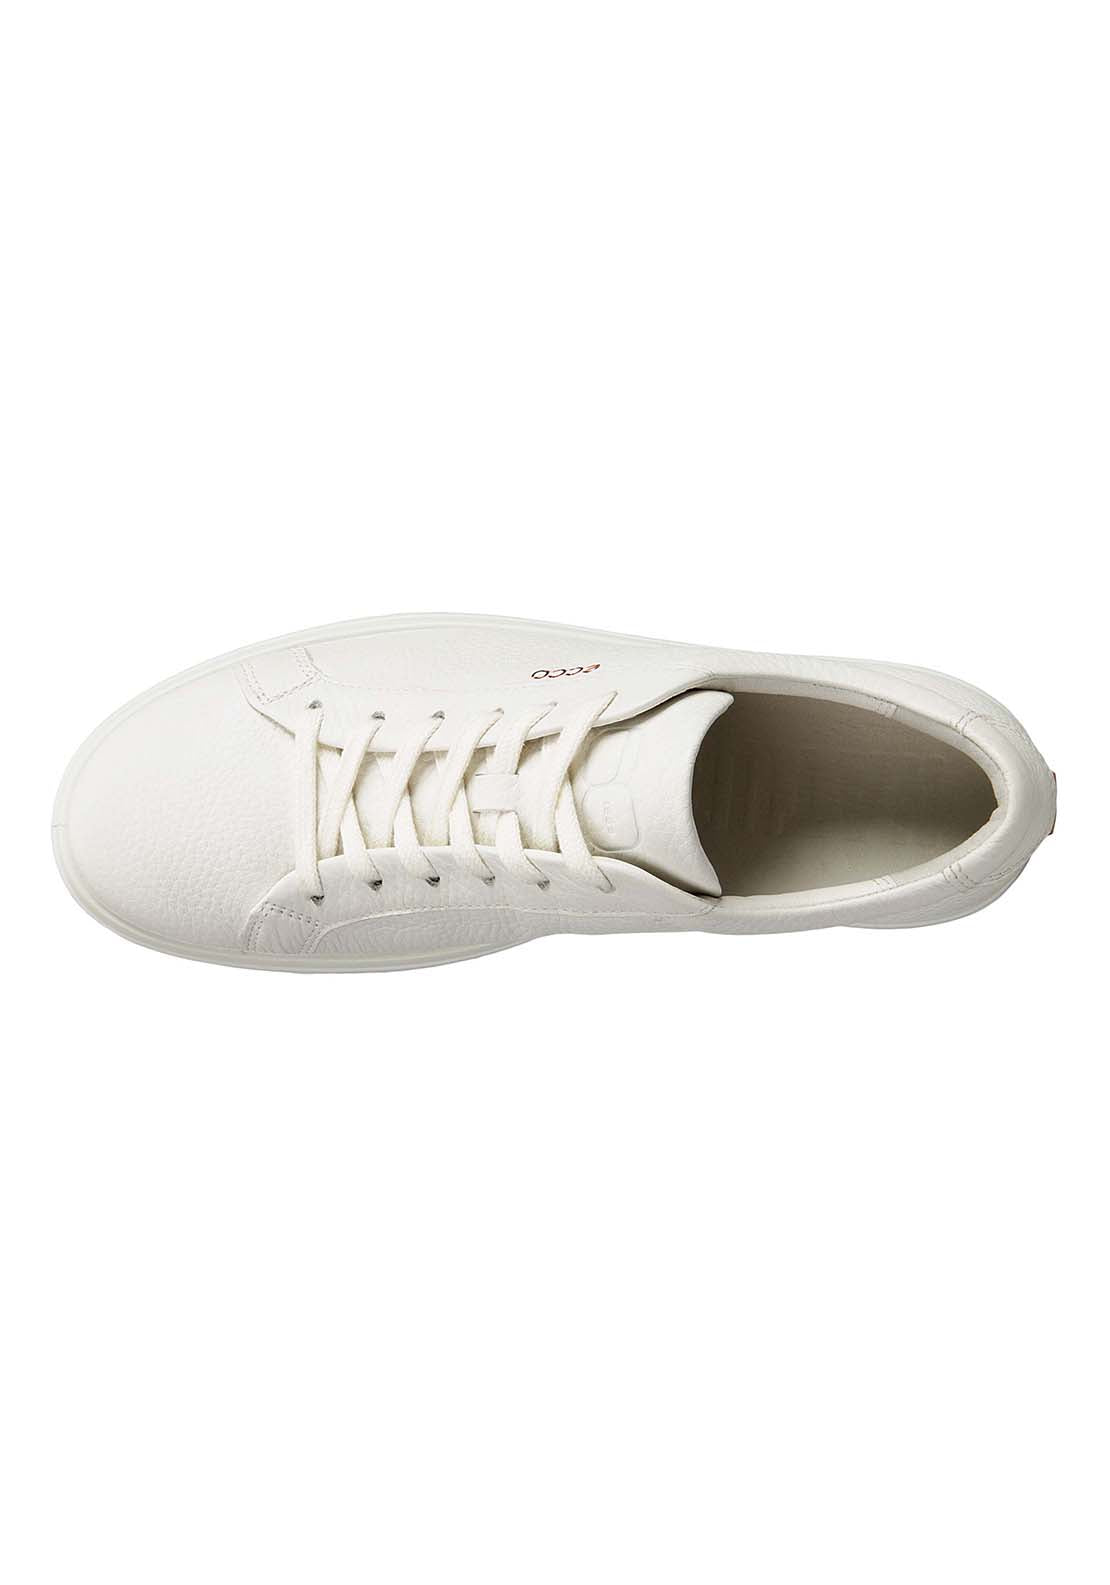 Ecco Soft 60 Casual Shoe 3 Shaws Department Stores